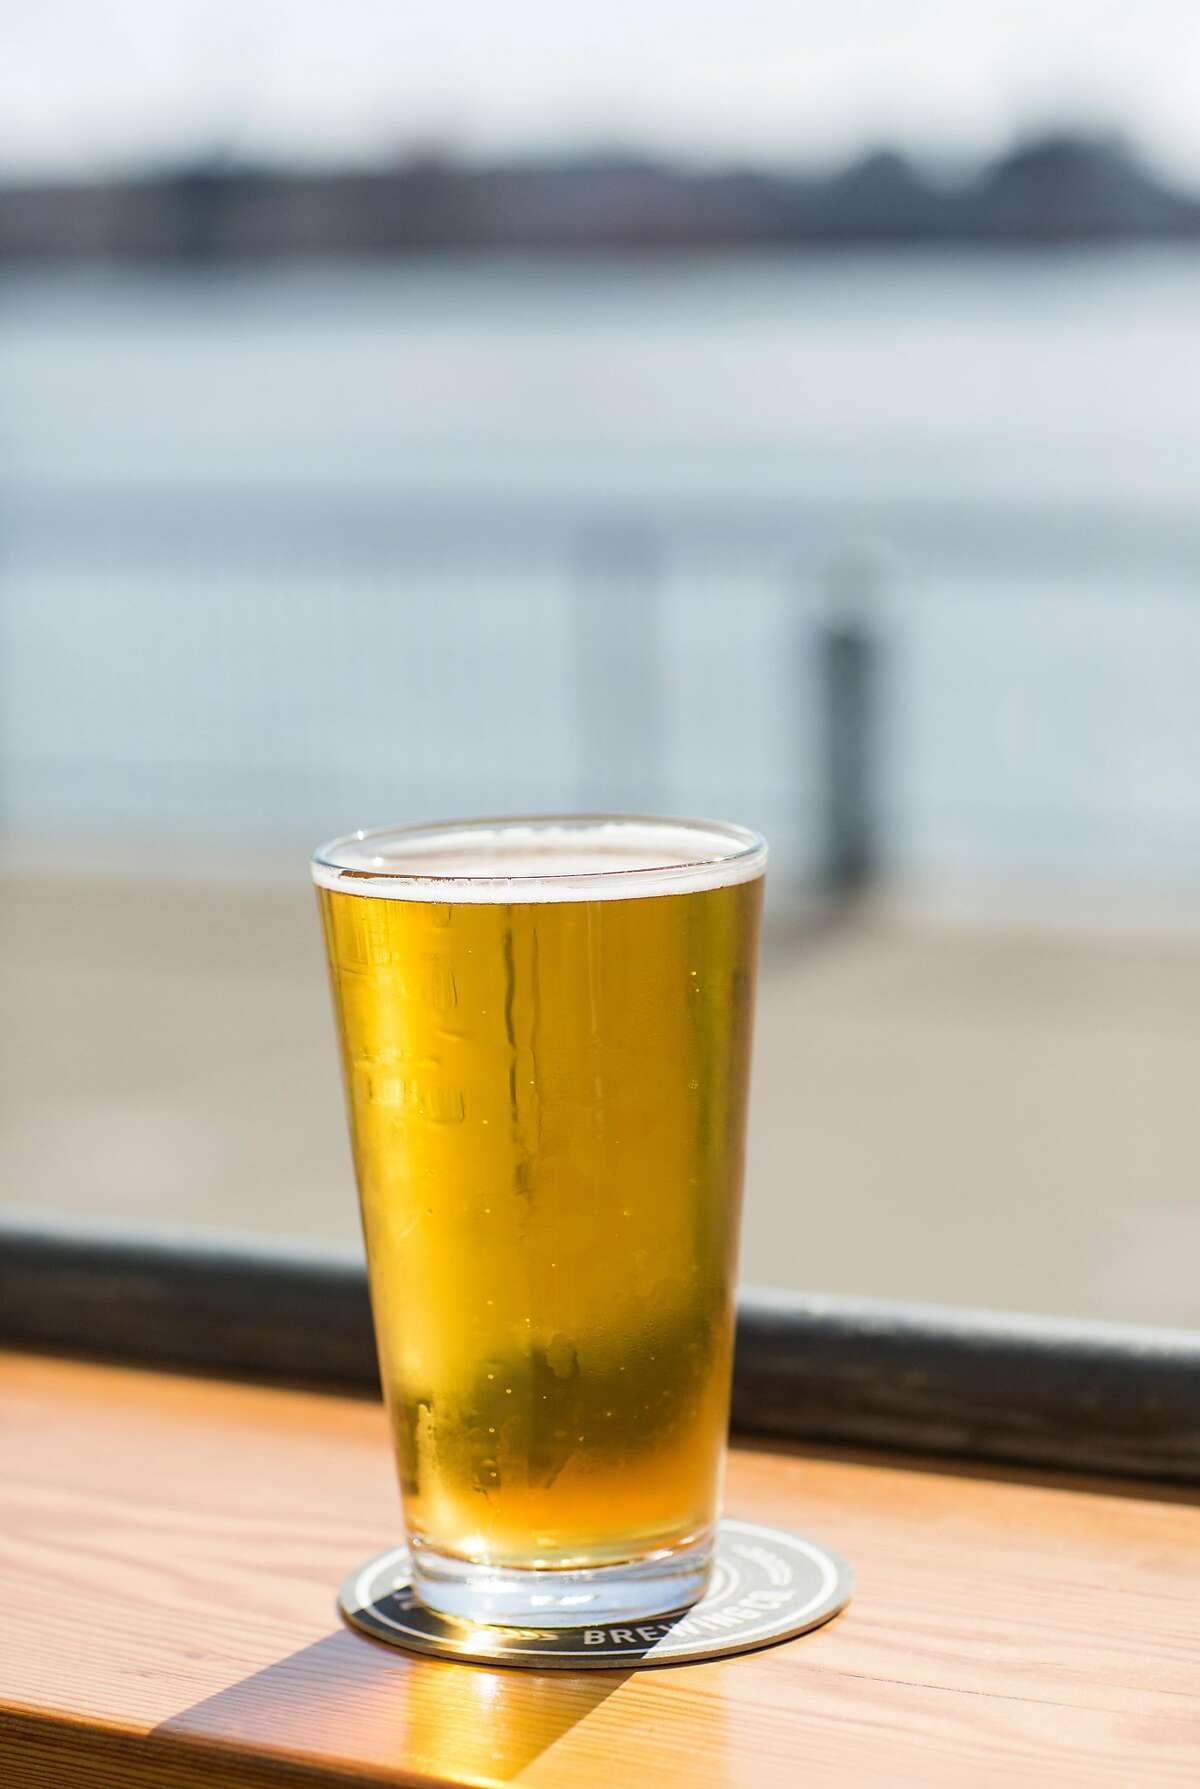 A glass of Saginaw Golden Ale, the flagship ale of Mare Island Brewing Co., is seen at their taproom in the Vallejo Ferry Building in Vallejo, Calif., on Saturday, September 30, 2017. The brewery is in the final construction stages at the historic Coal Sheds on Mare Island where where they will be doing all their brewing.